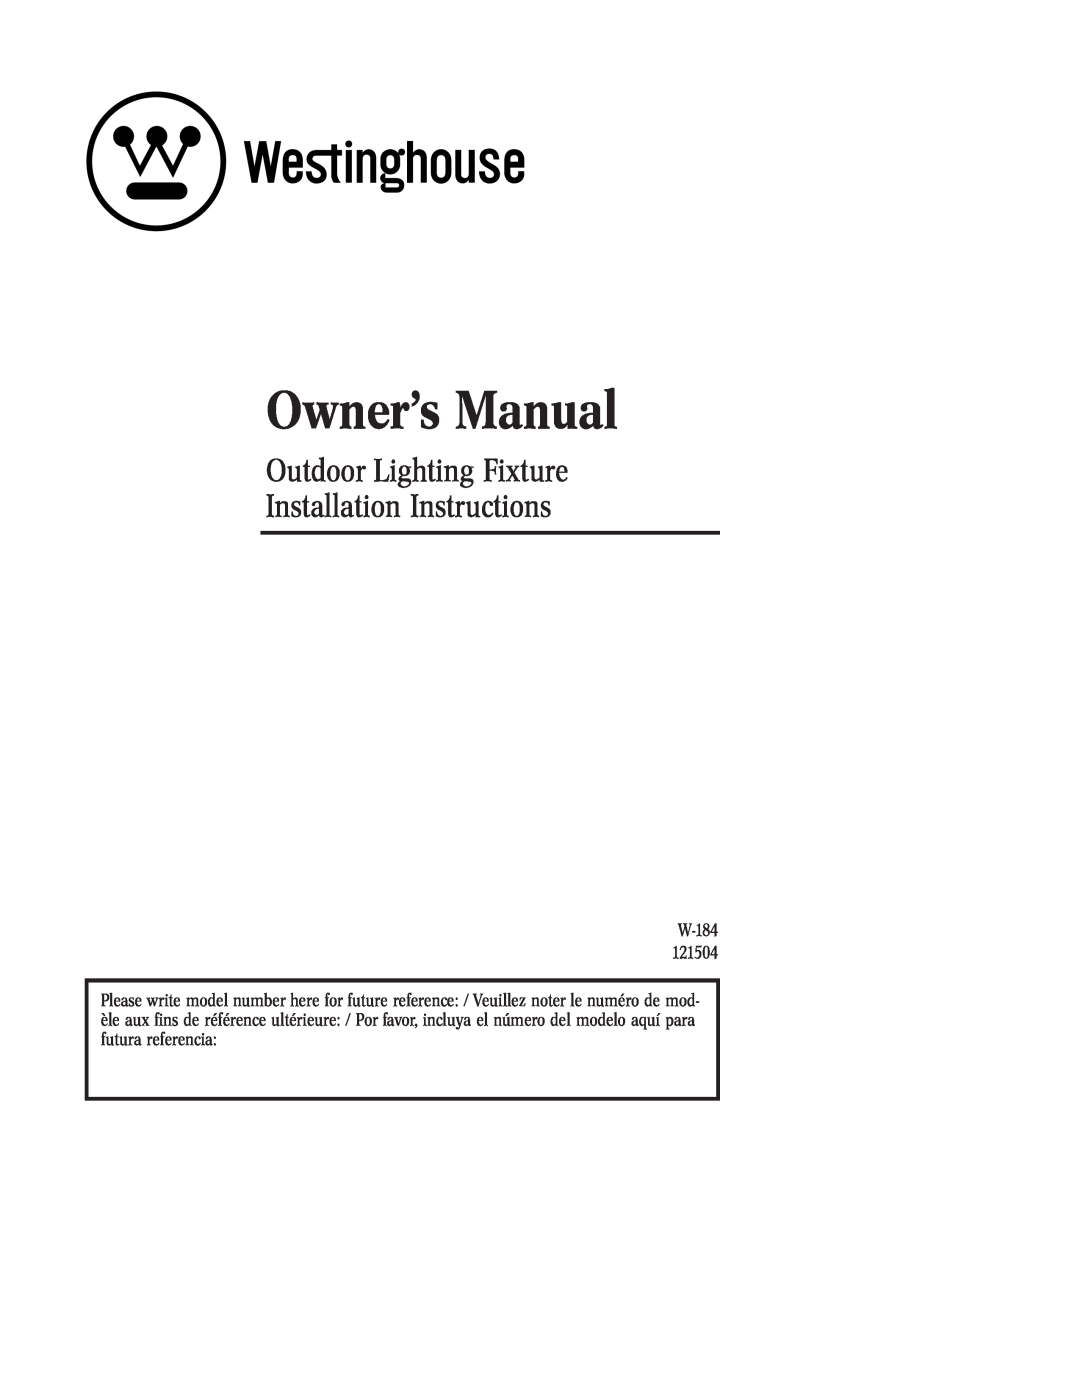 Westinghouse 121504 owner manual Outdoor Lighting Fixture Installation Instructions 